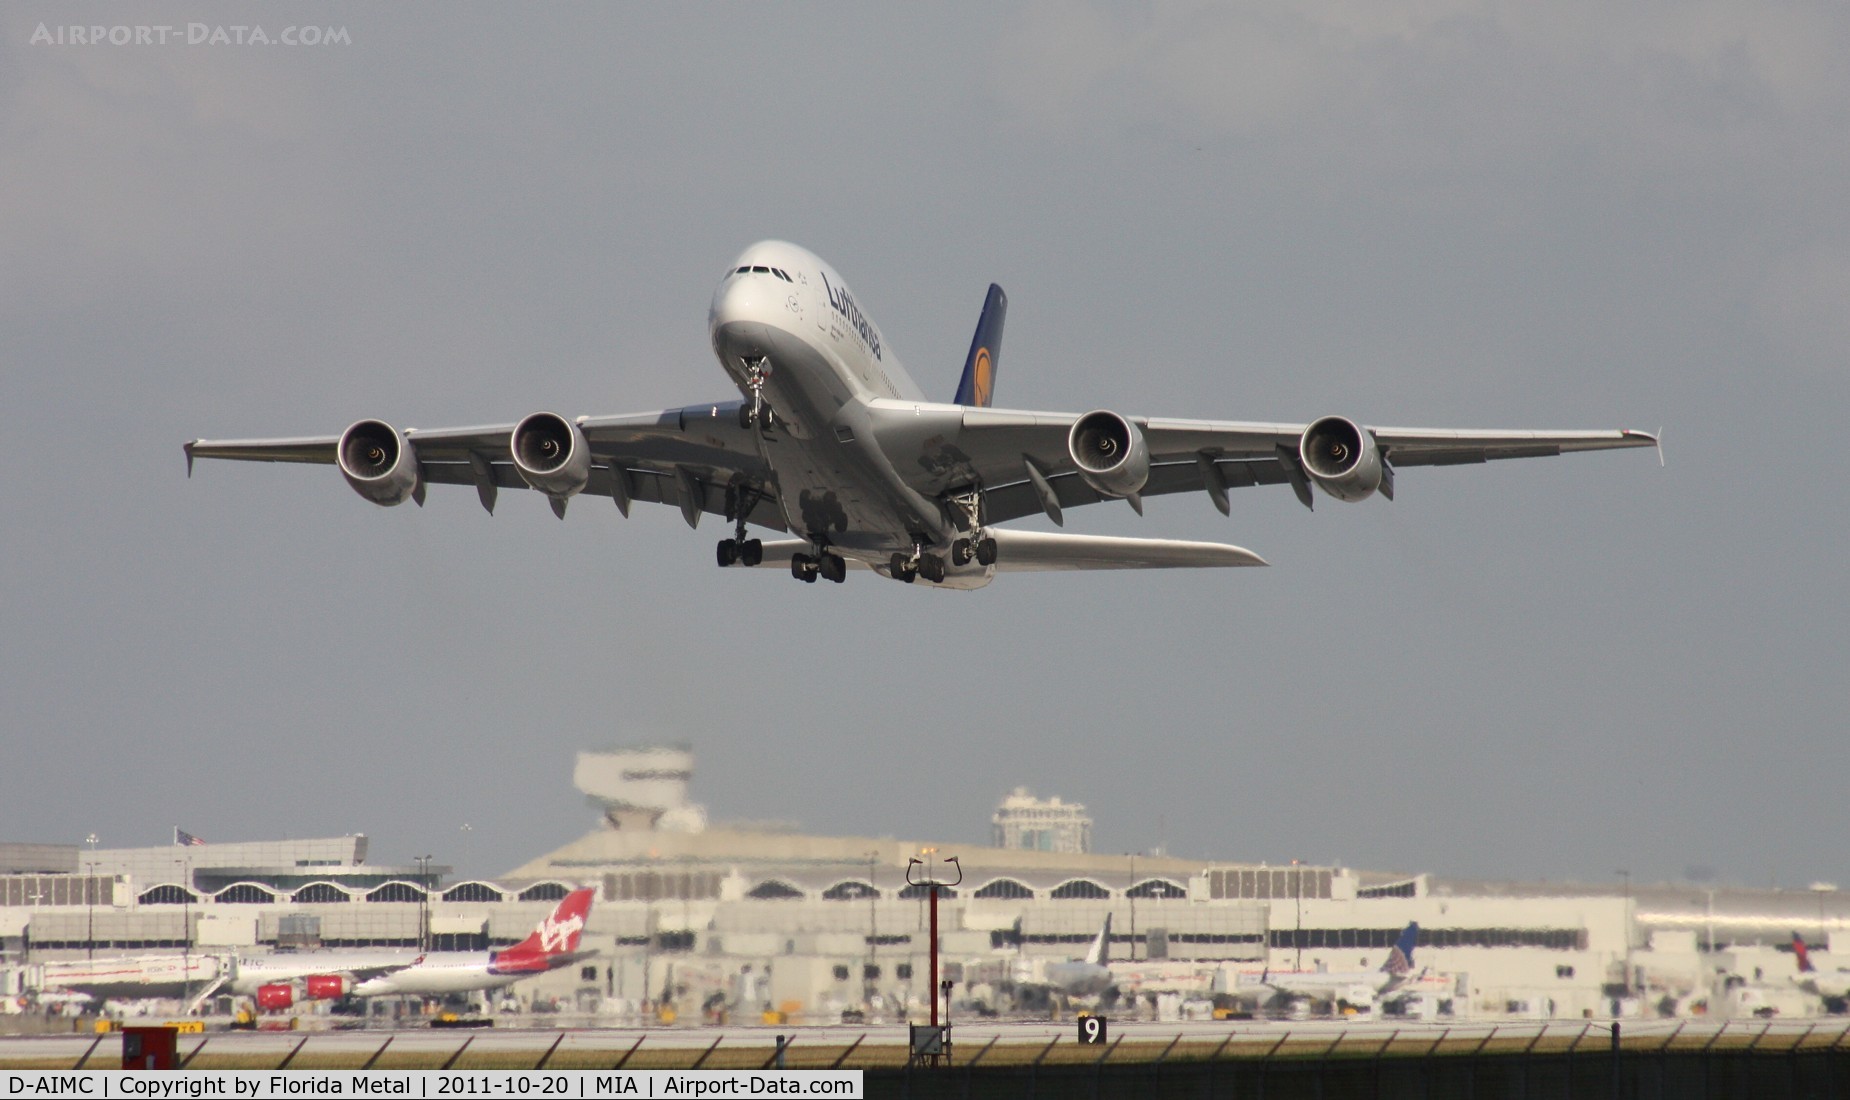 D-AIMC, 2010 Airbus A380-841 C/N 044, For #35,000 - Lufthansa A380 lifting off from Miami